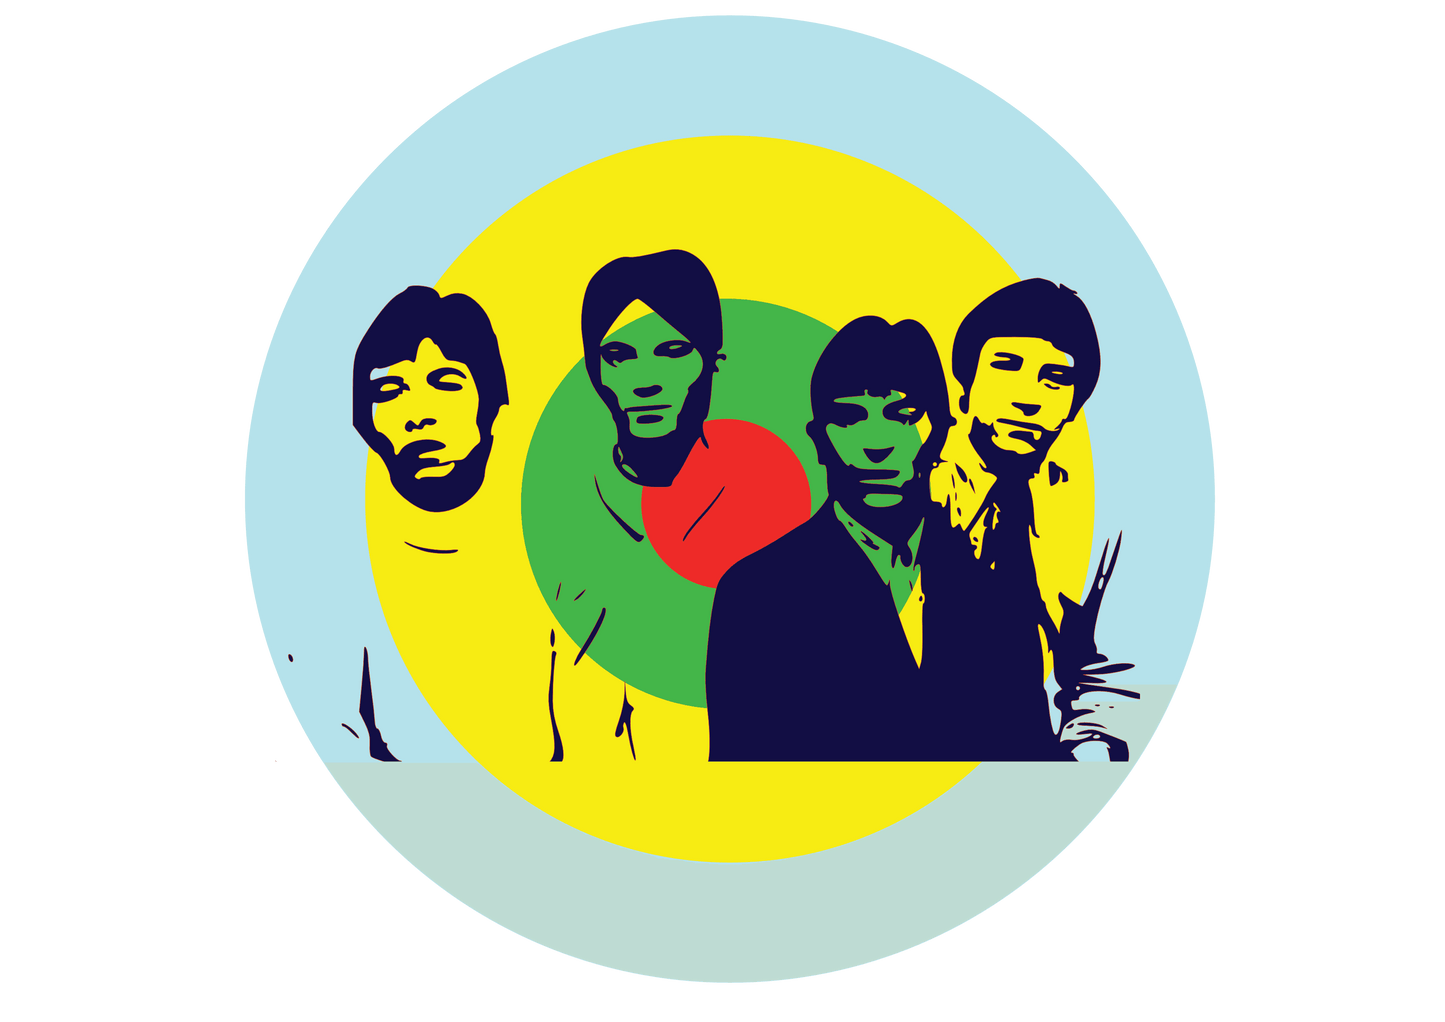 THERE ARE BUT FOUR SMALL FACES: T-Shirt Inspired by The Small Faces - SOUND IS COLOUR